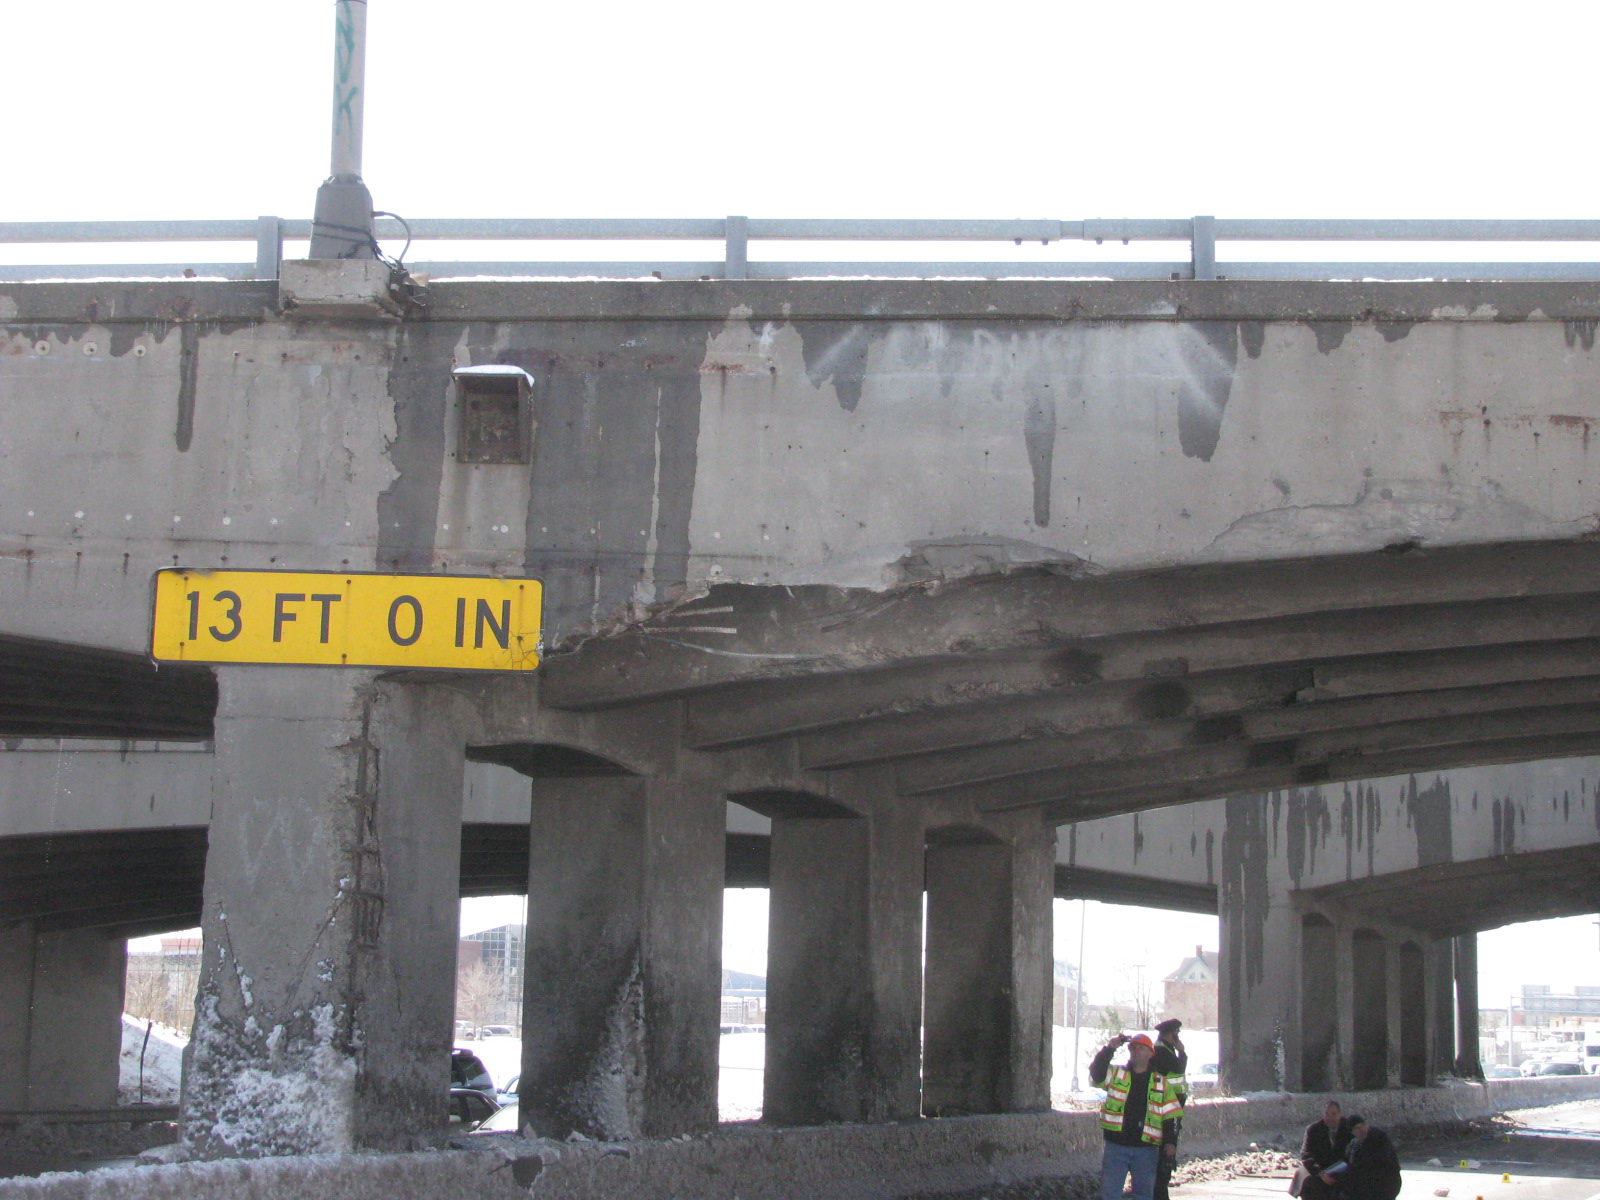 23rd Avenue Bridge with 13 ft 0 in sign and crew members underneath.JPG detail image